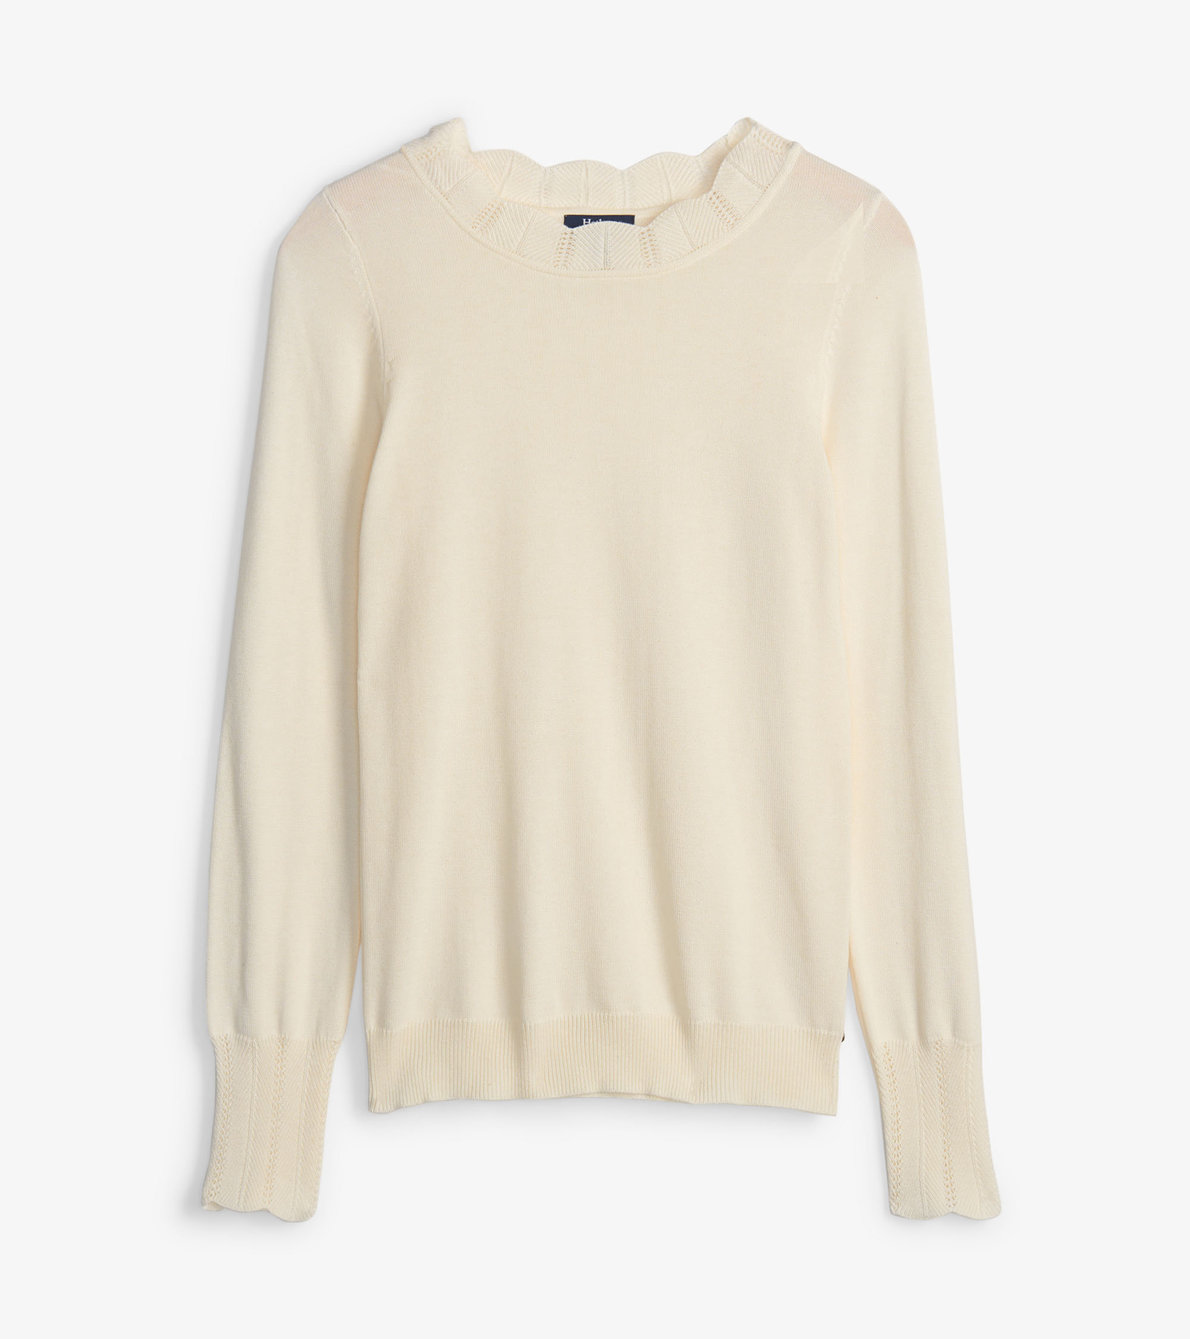 View larger image of Alice Sweater - Cream